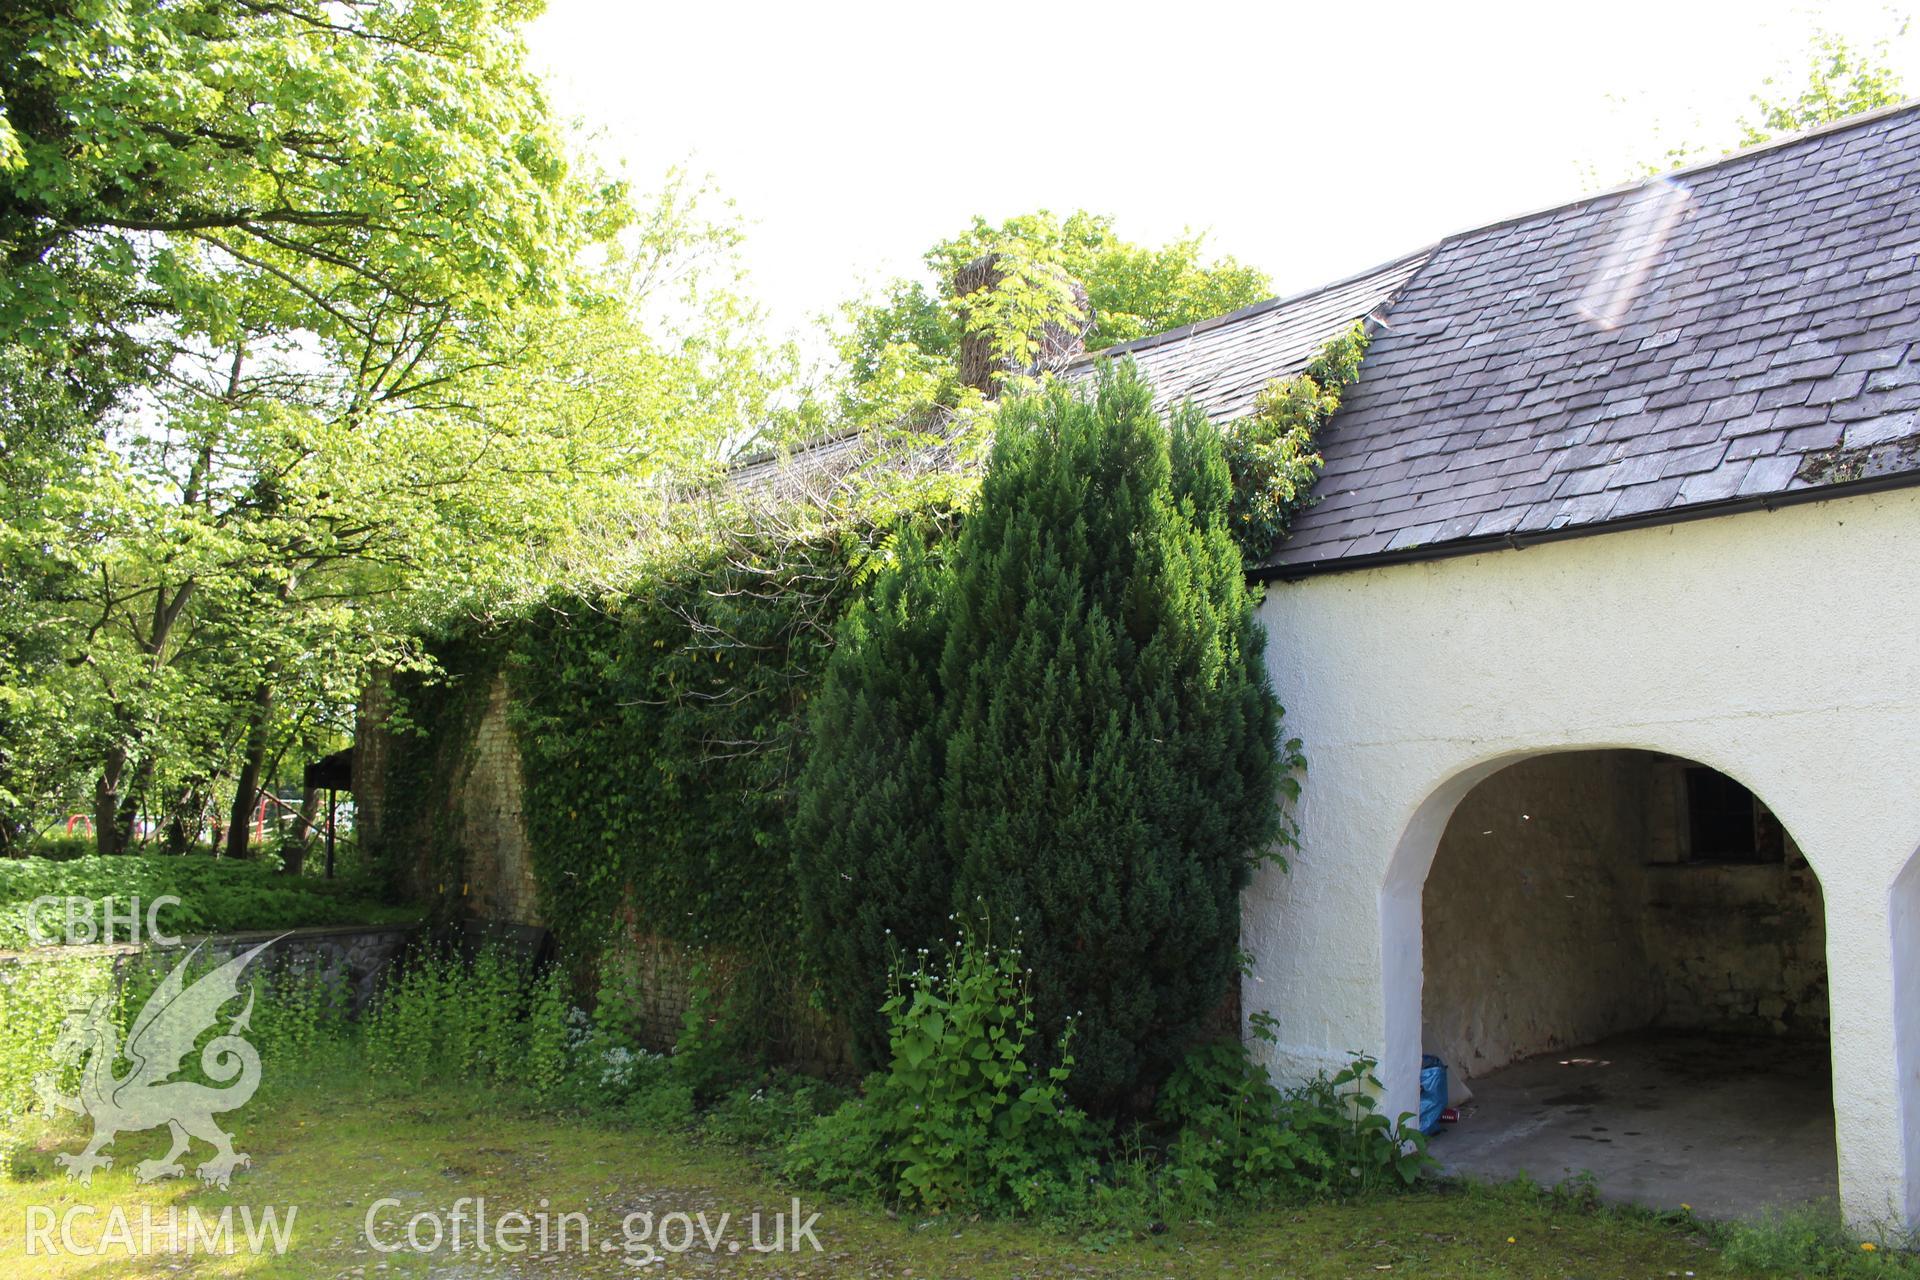 Colour photograph showing exterior view of outbuildings at rear of 5-7 Mwrog Street, Ruthin. Photographed during survey conducted by Geoff Ward on 14th May 2014.